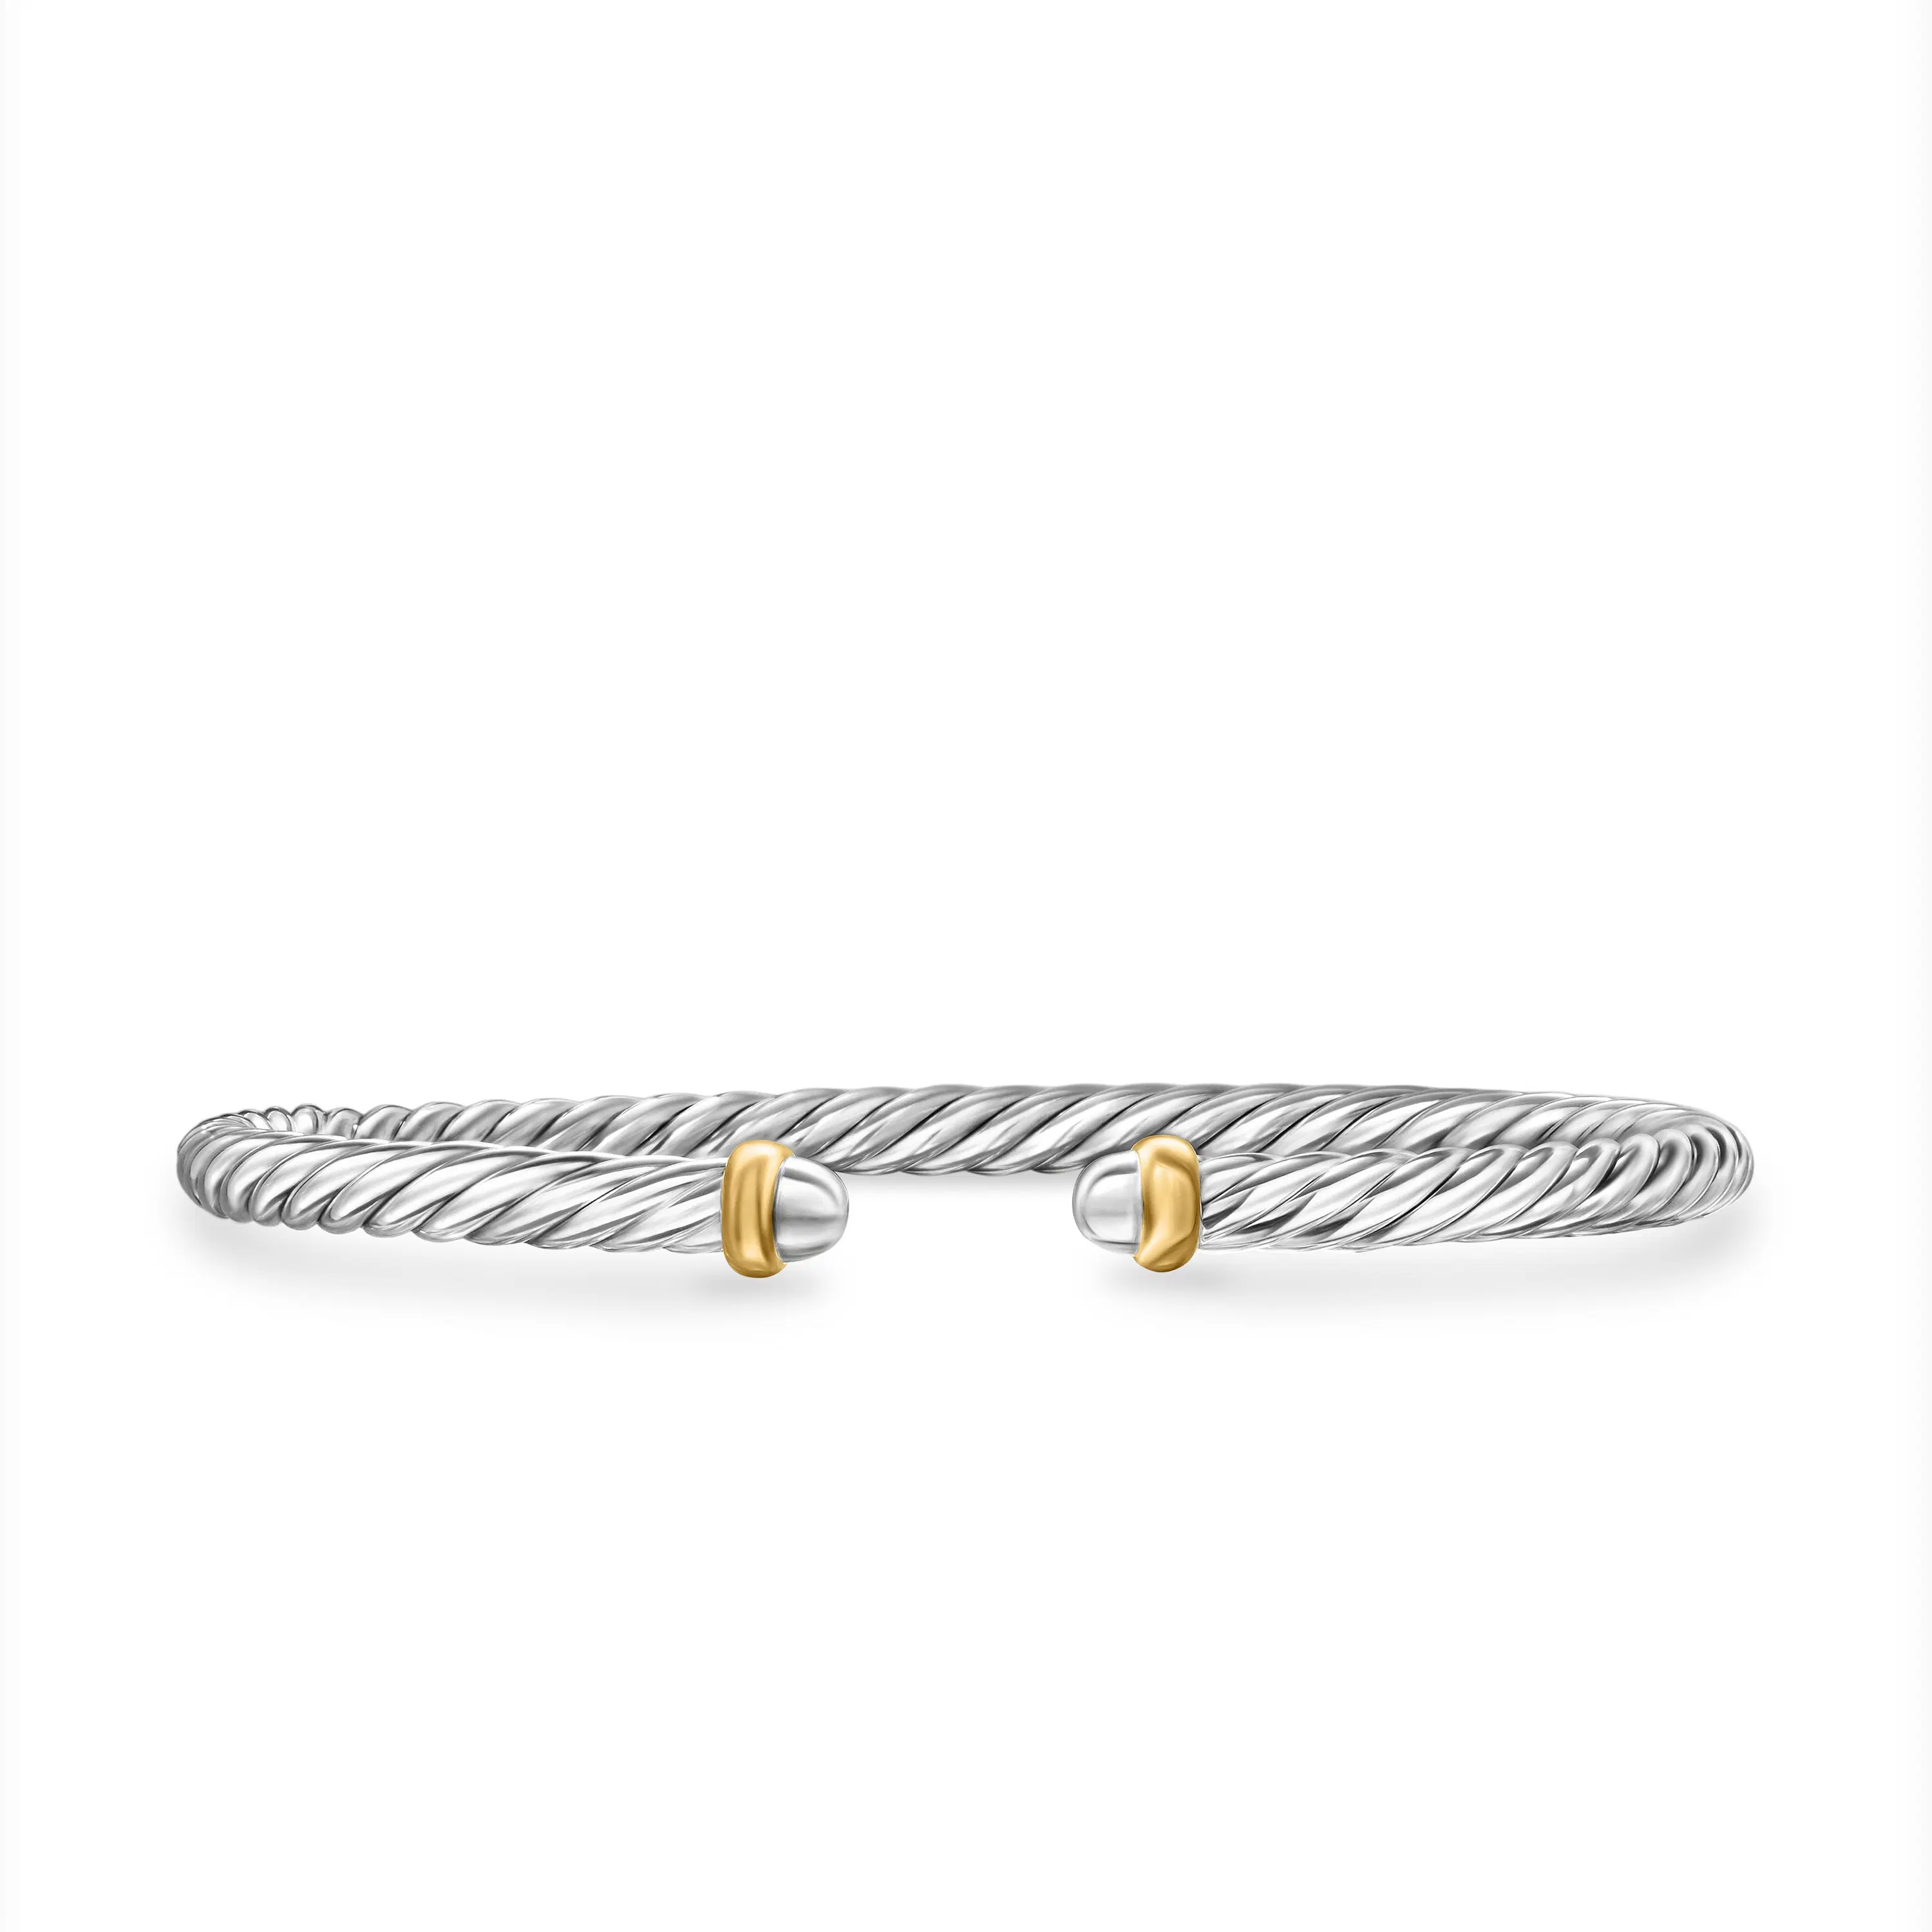 David Yurman Sterling Silver Cable Flex Bracelet with Gold, Size Small